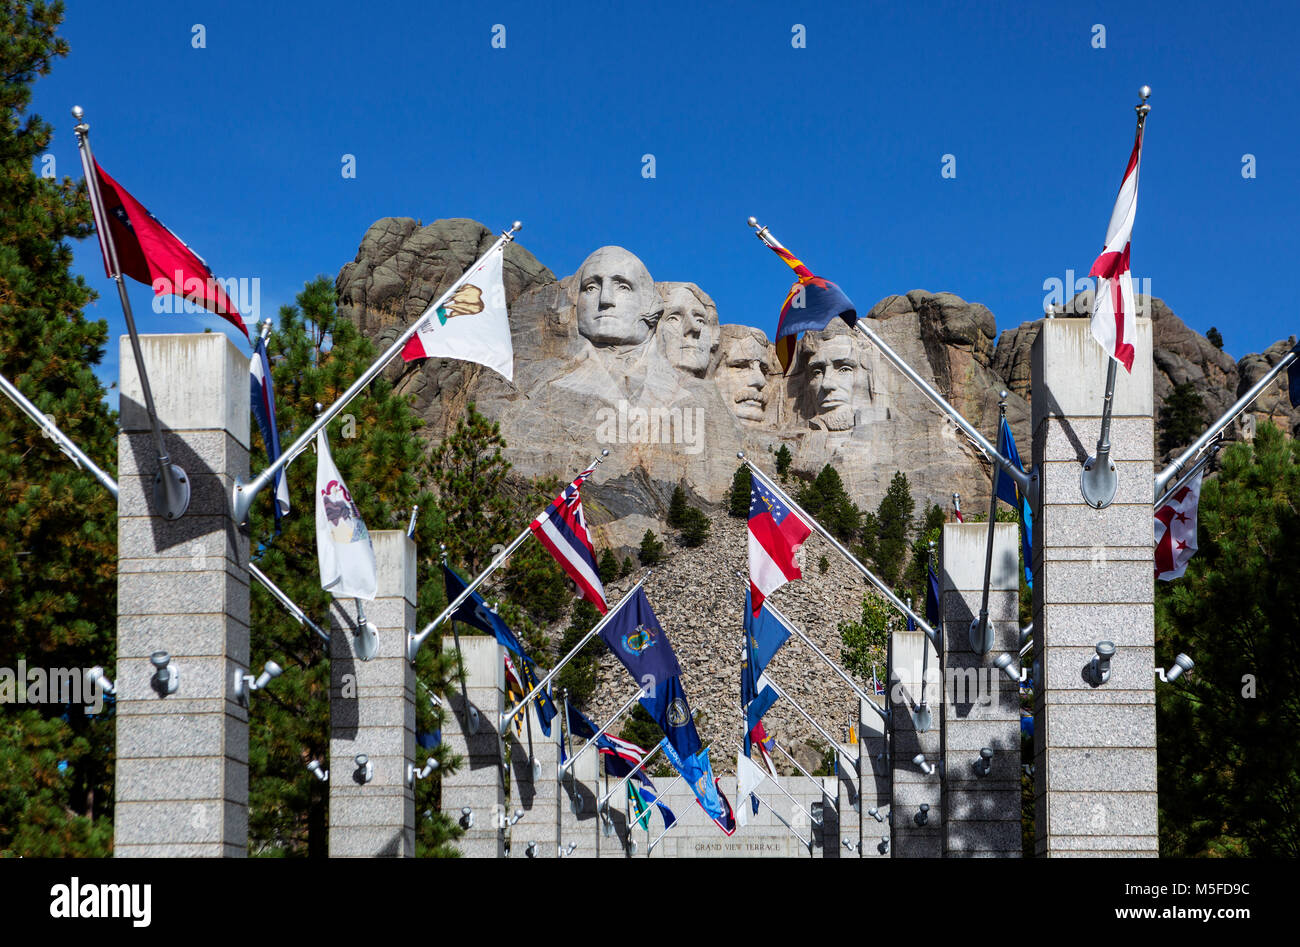 SD00029-00...SOUTH DAKOTA - Avenue Or The Flags and presedents Georg Washington, Thomas Jefferson, Theodore Roosevelt and Abraham Lincoln carved into  Stock Photo